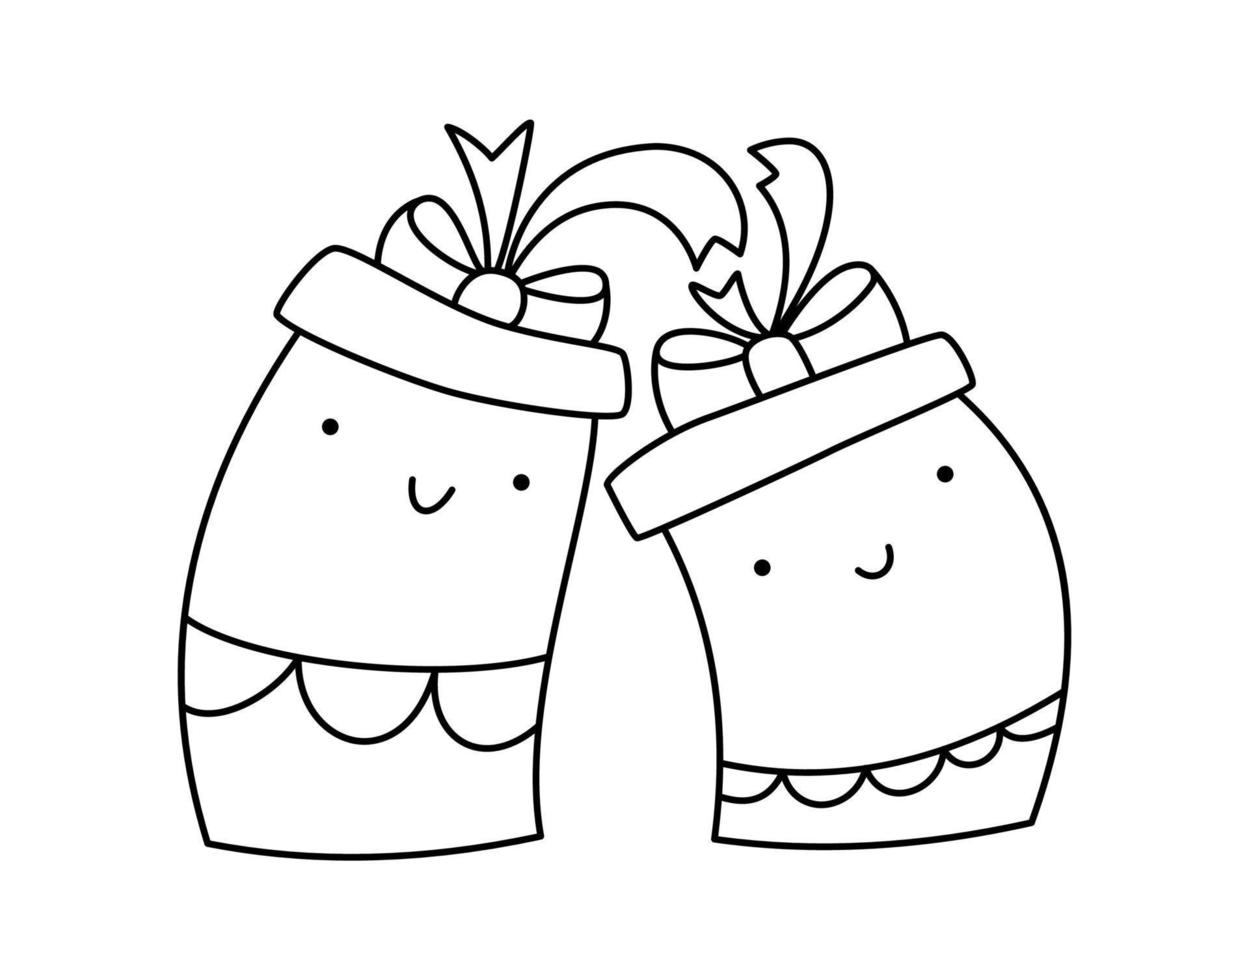 Vector line Christmas illustration couple of happy love smiling gift boxes. Pair of cute patterned elements for winter design. Joy and family concept. Doodle style